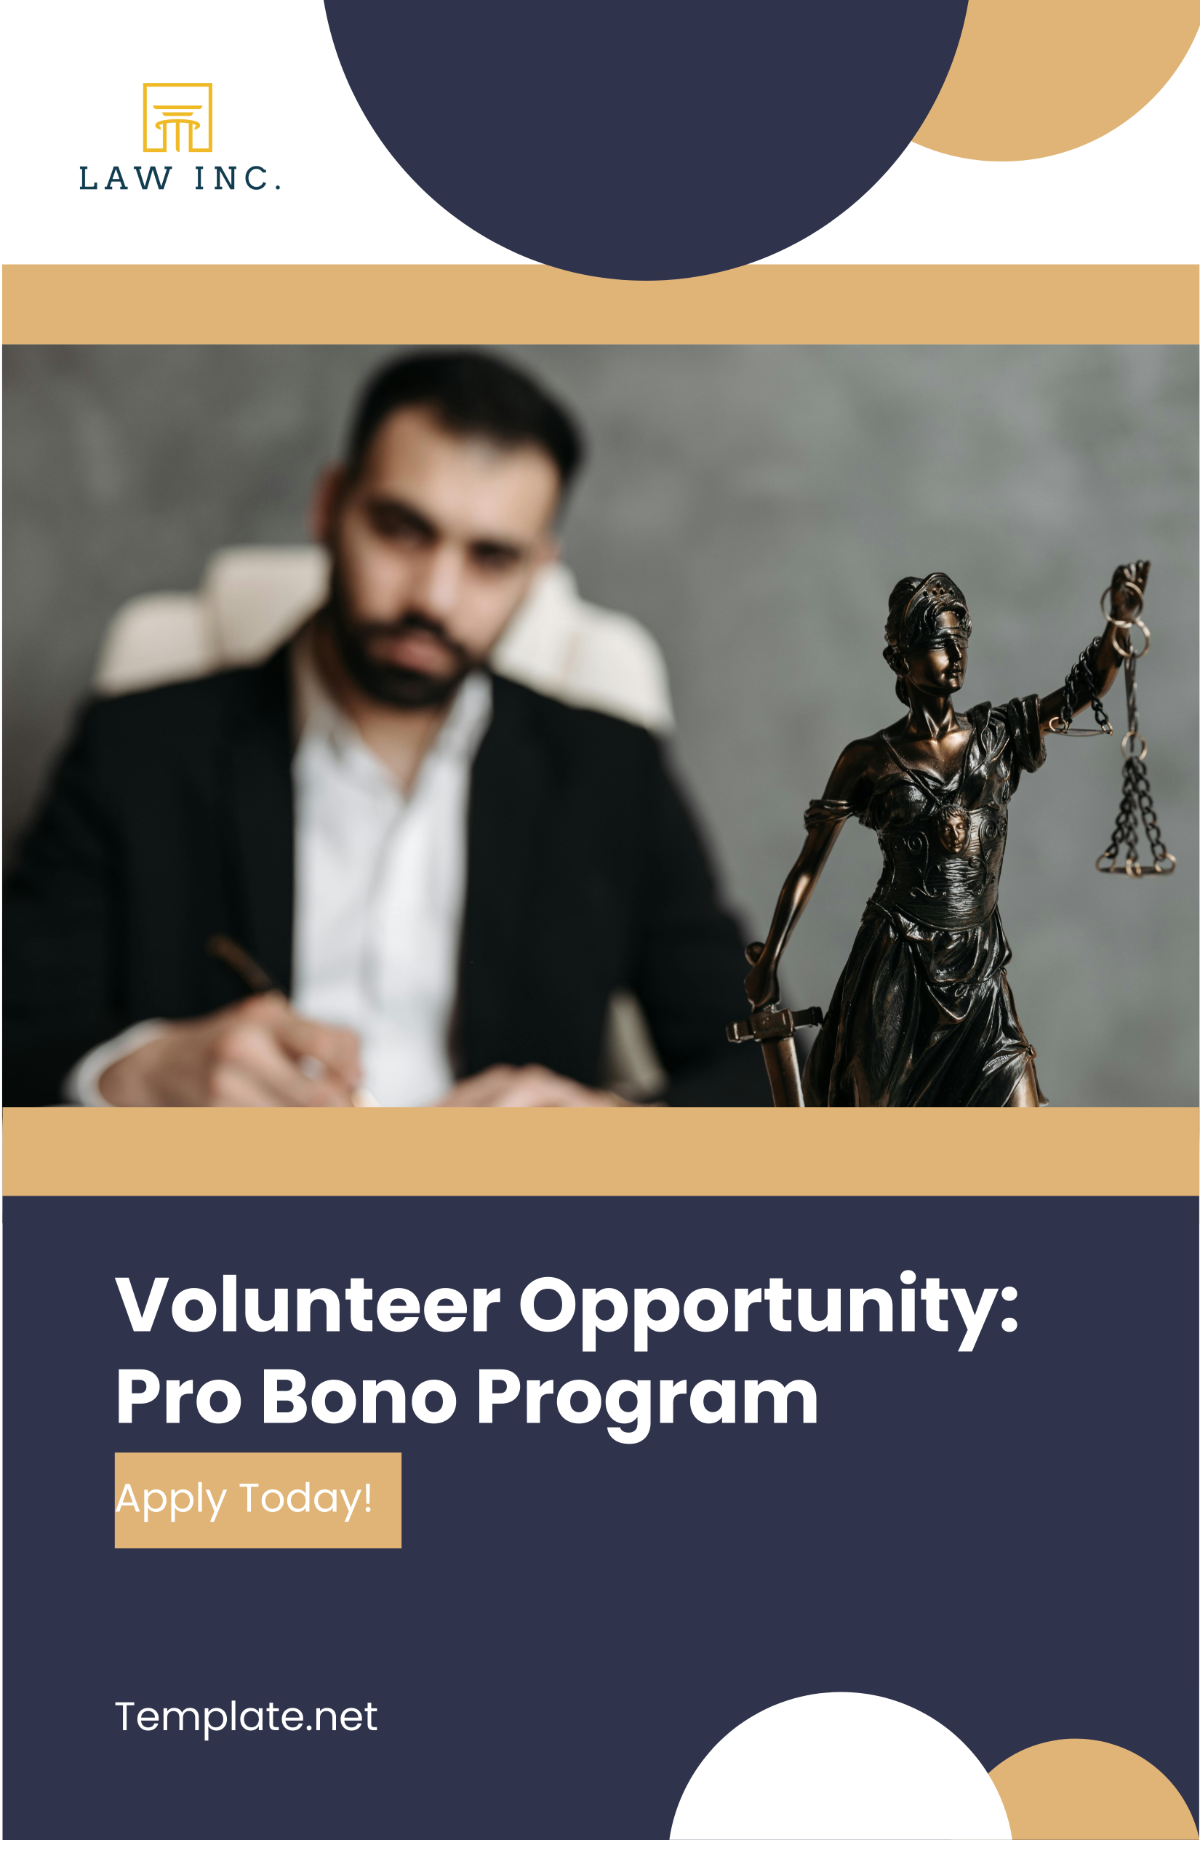 Law Firm Volunteer Opportunity Poster